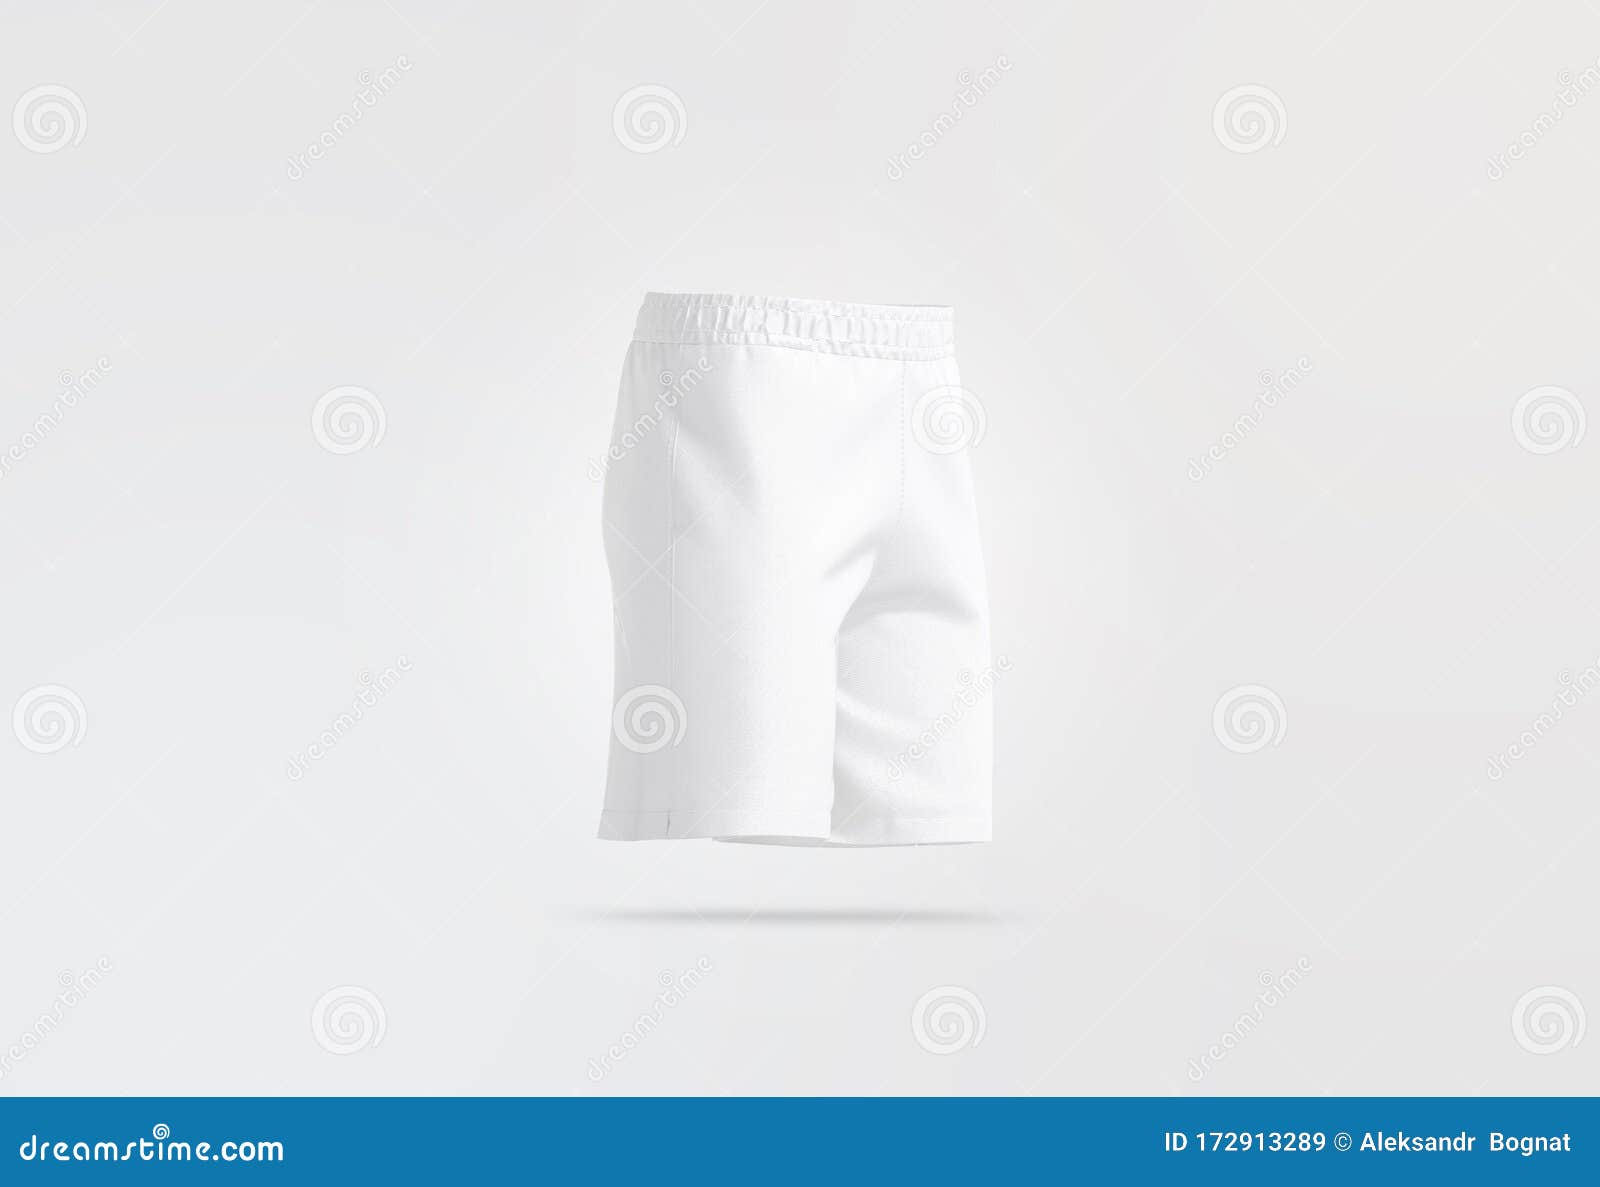 Download Blank White Soccer Shorts Mockup, Side View, Gray ...